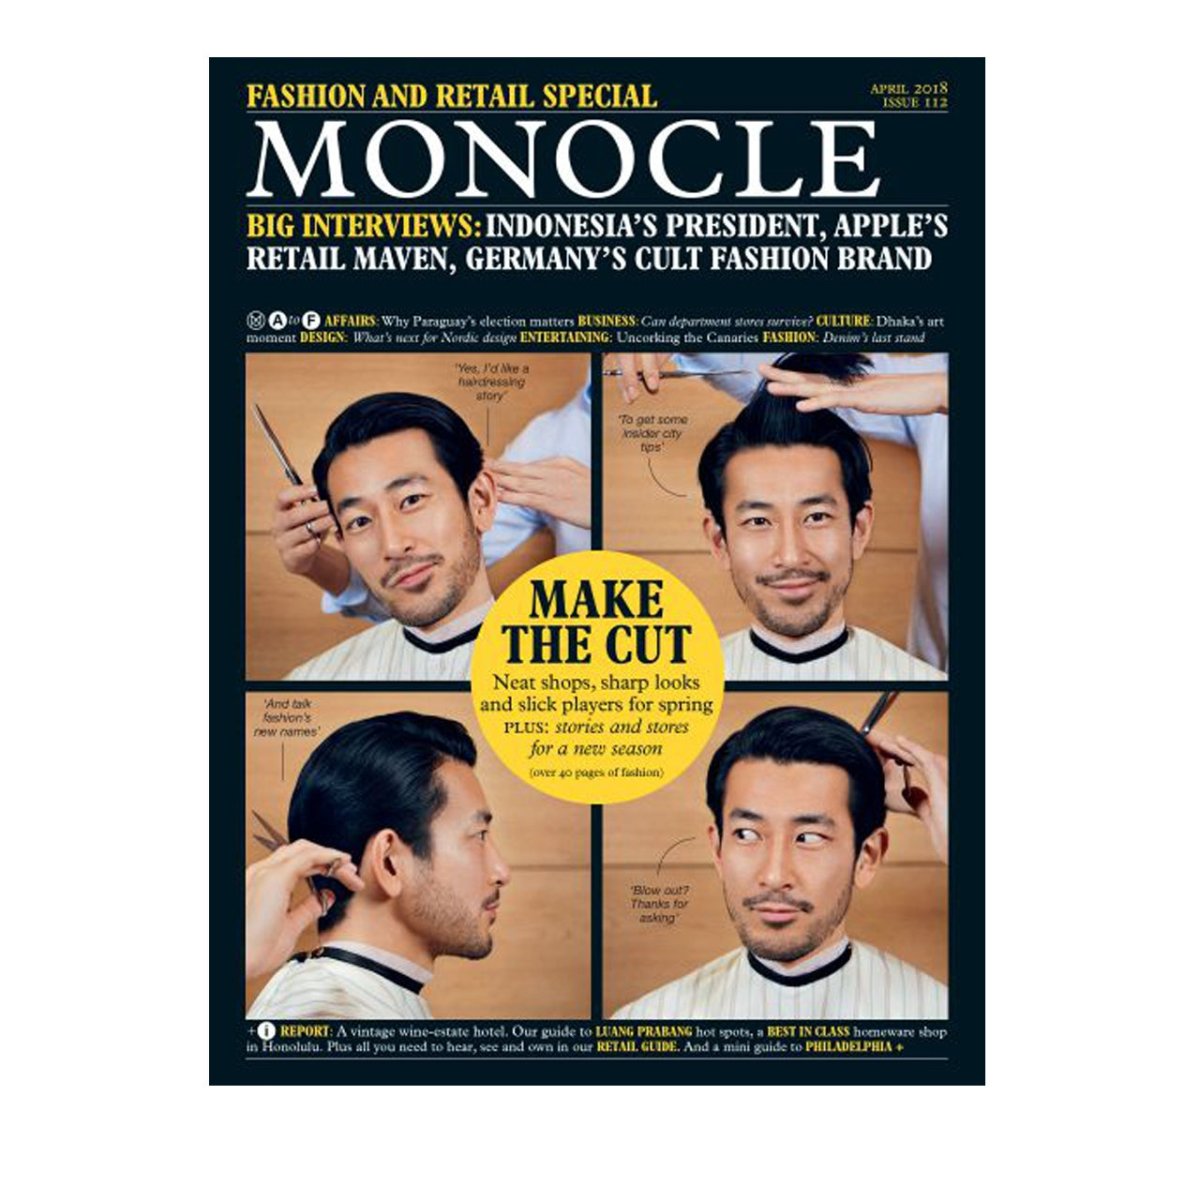 Image of MONOCLE Issue 112: Fashion and Retail Special